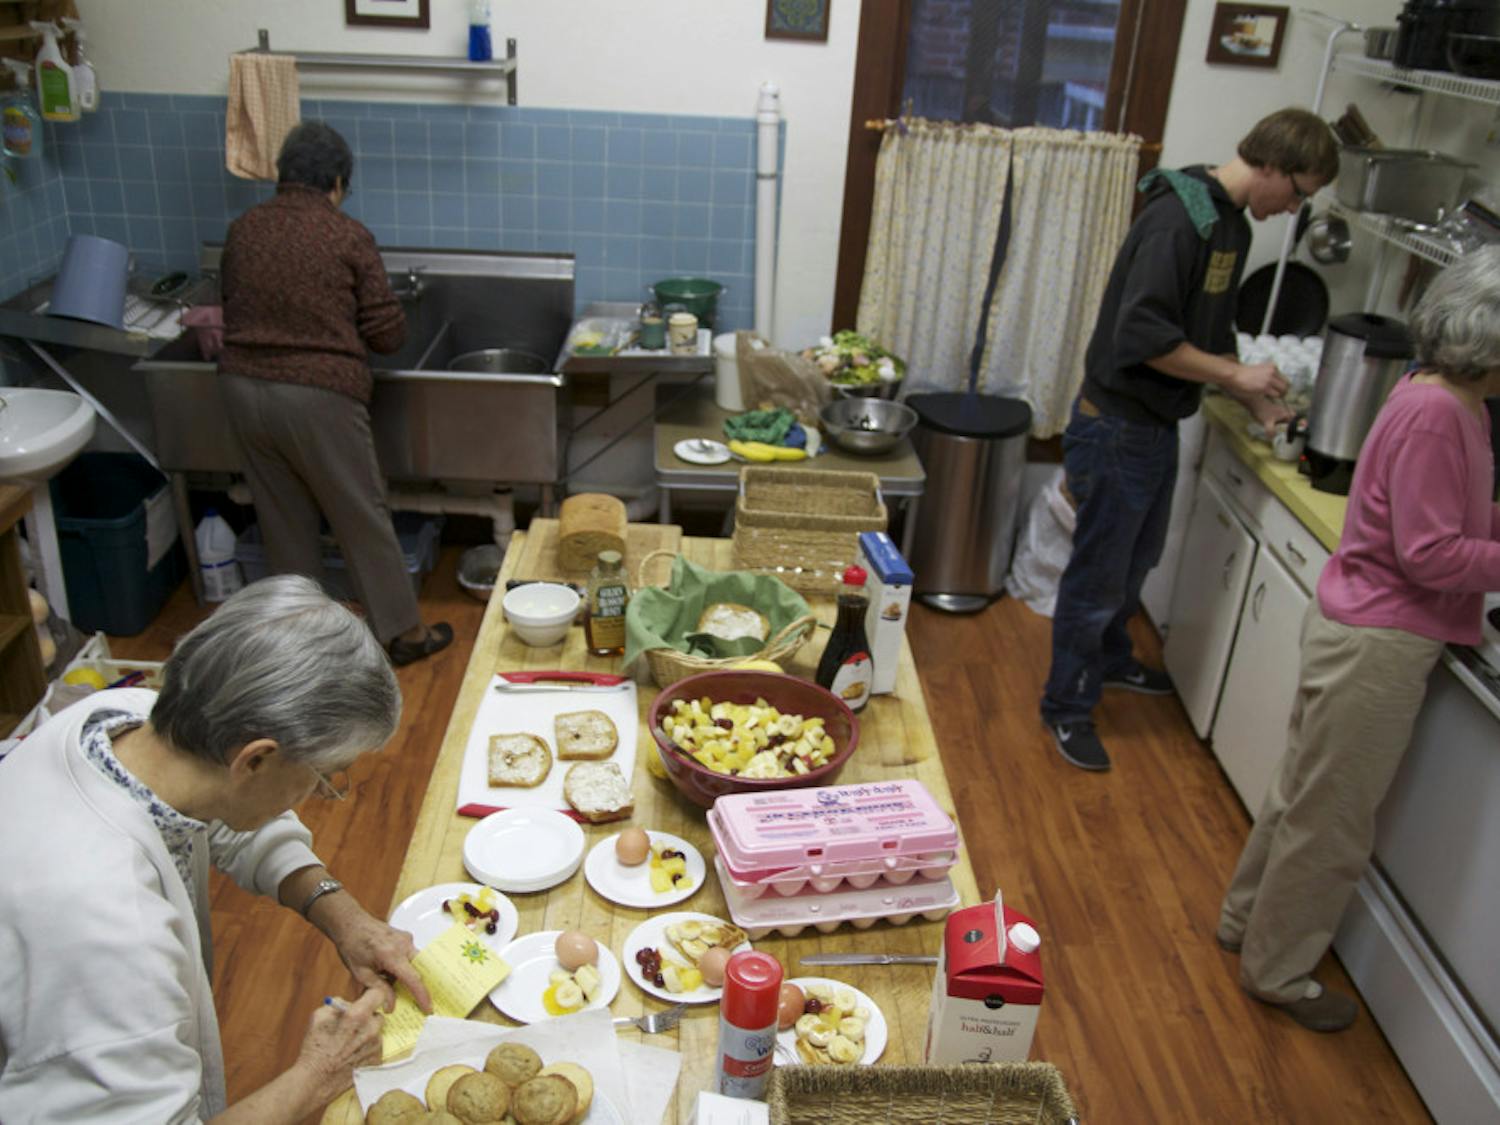 Green House, located at 213 NW Second Ave., provides food, hospitality and a cozy place to hang out for Gainesville’s homeless